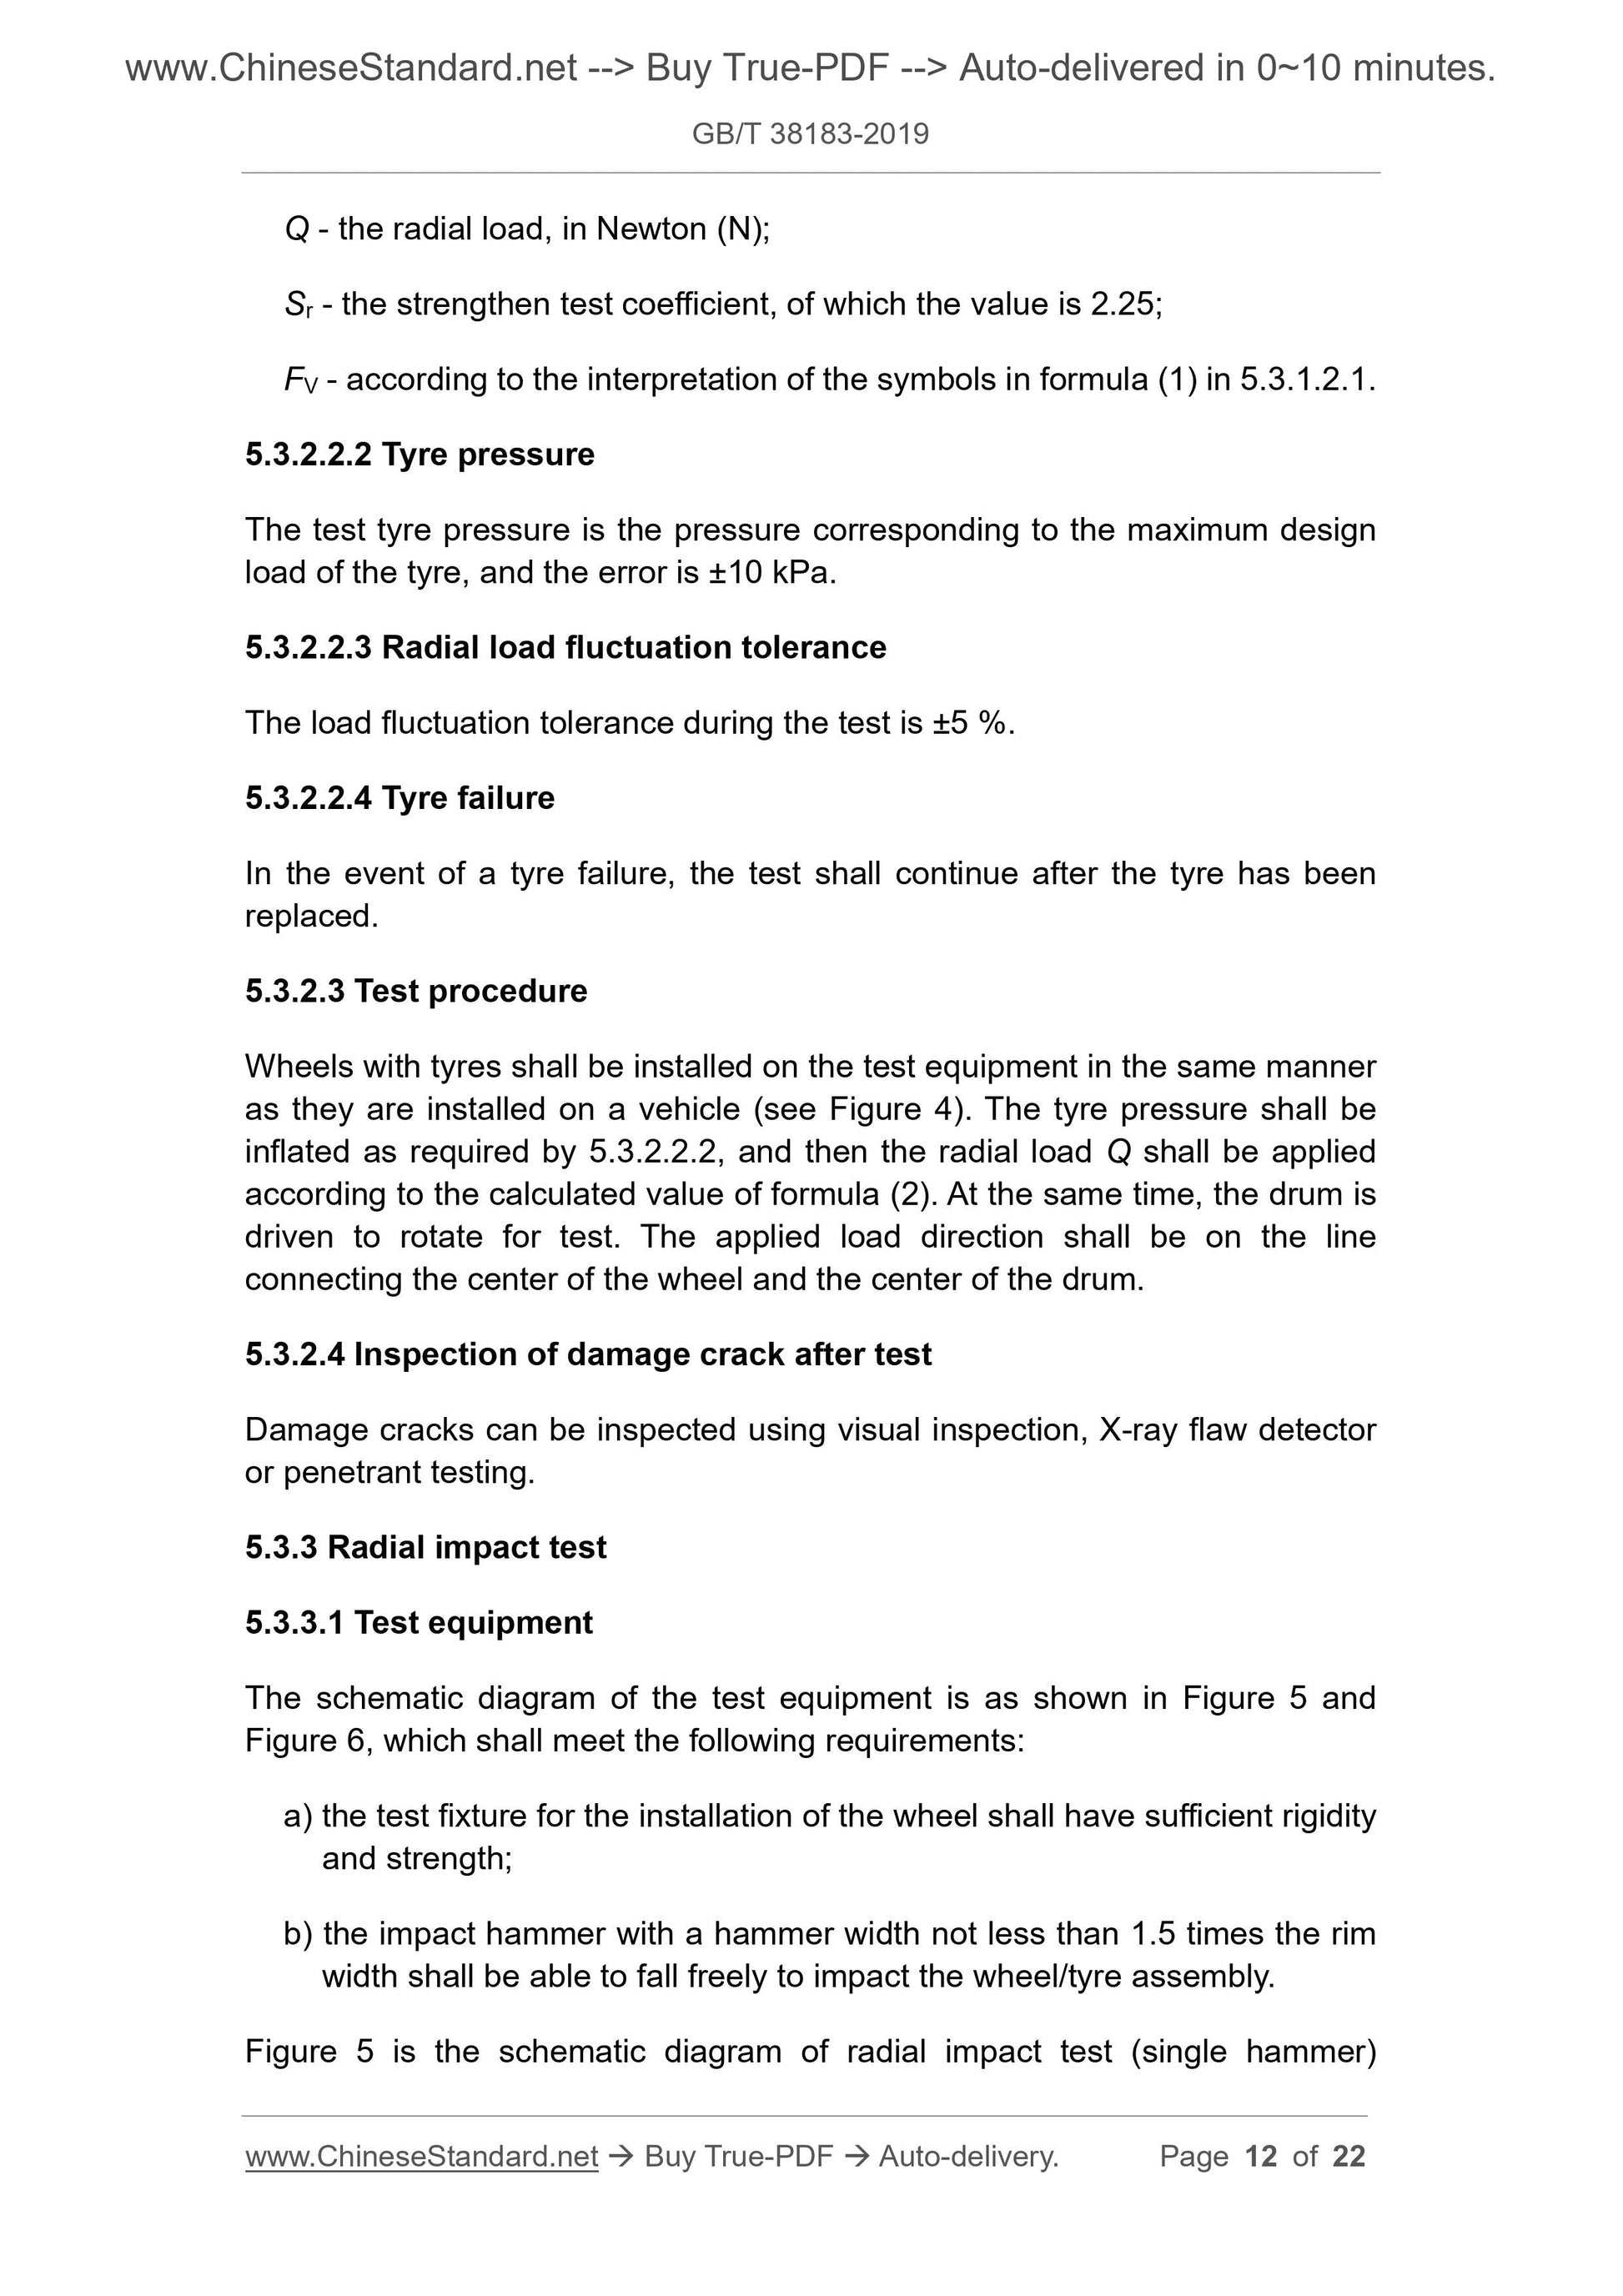 GB/T 38183-2019 Page 7